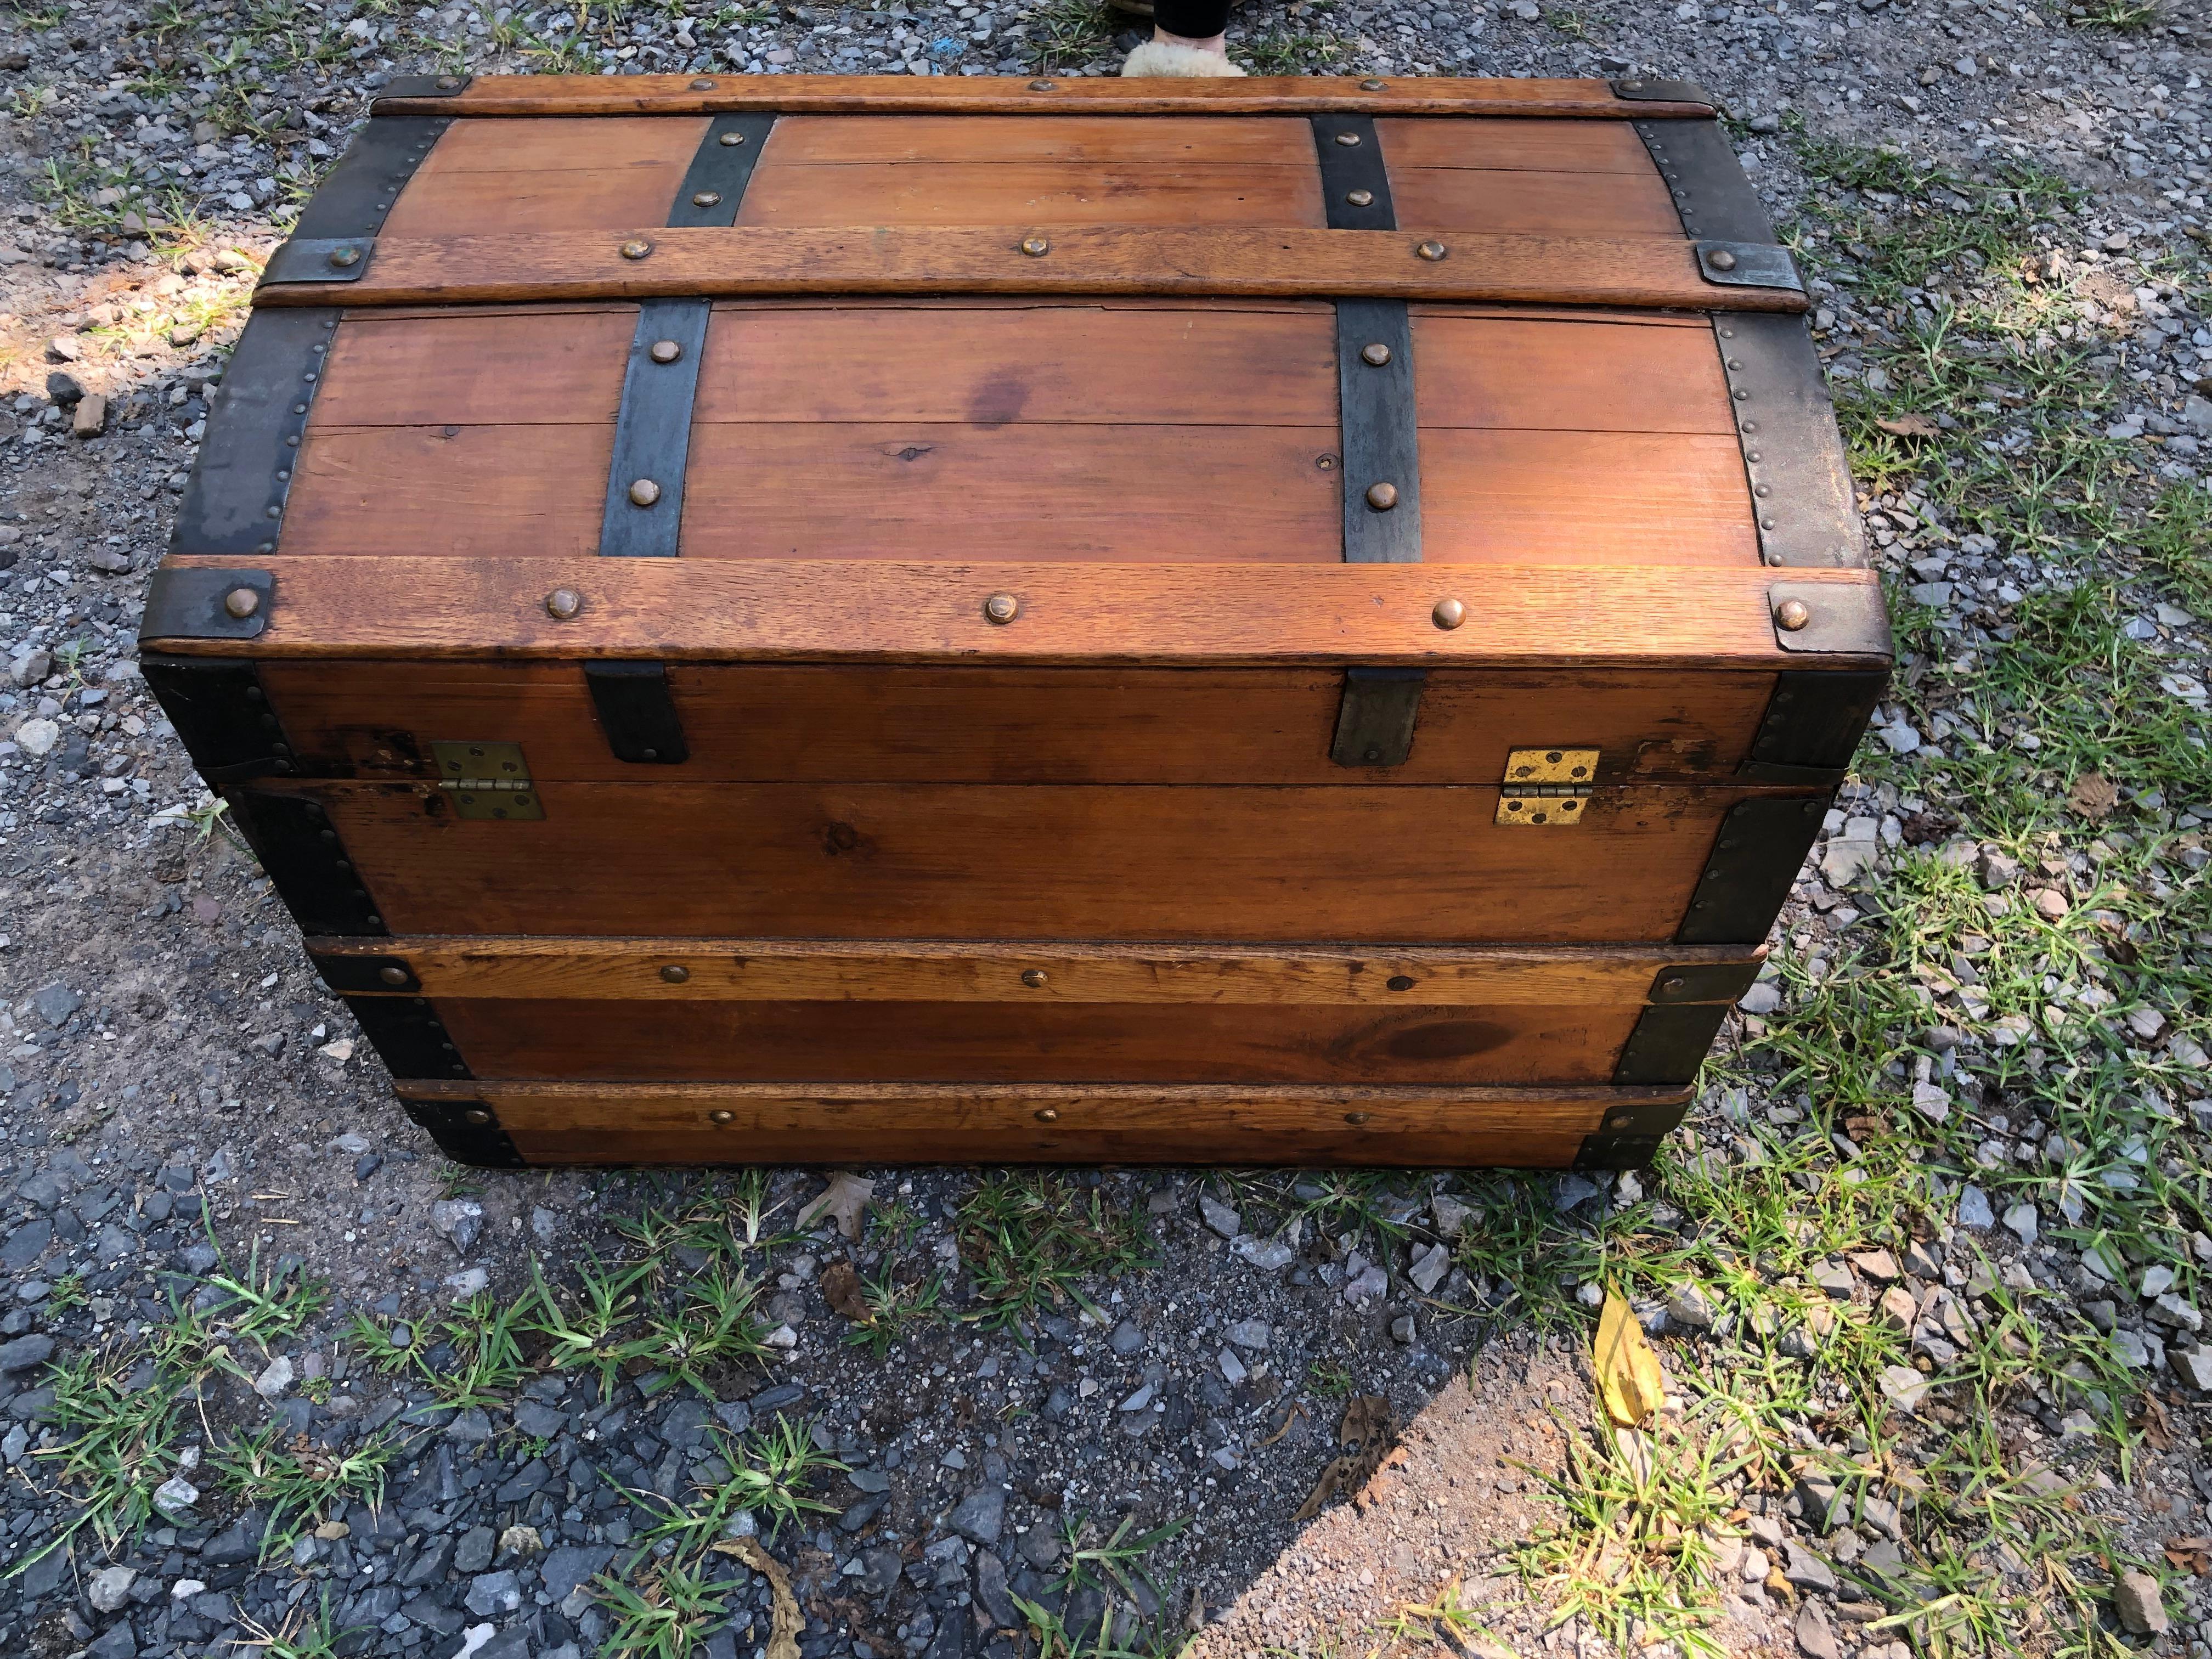 Handsome old wooden trunk or chest having great looking heavy straps of iron with nailhead detailing.